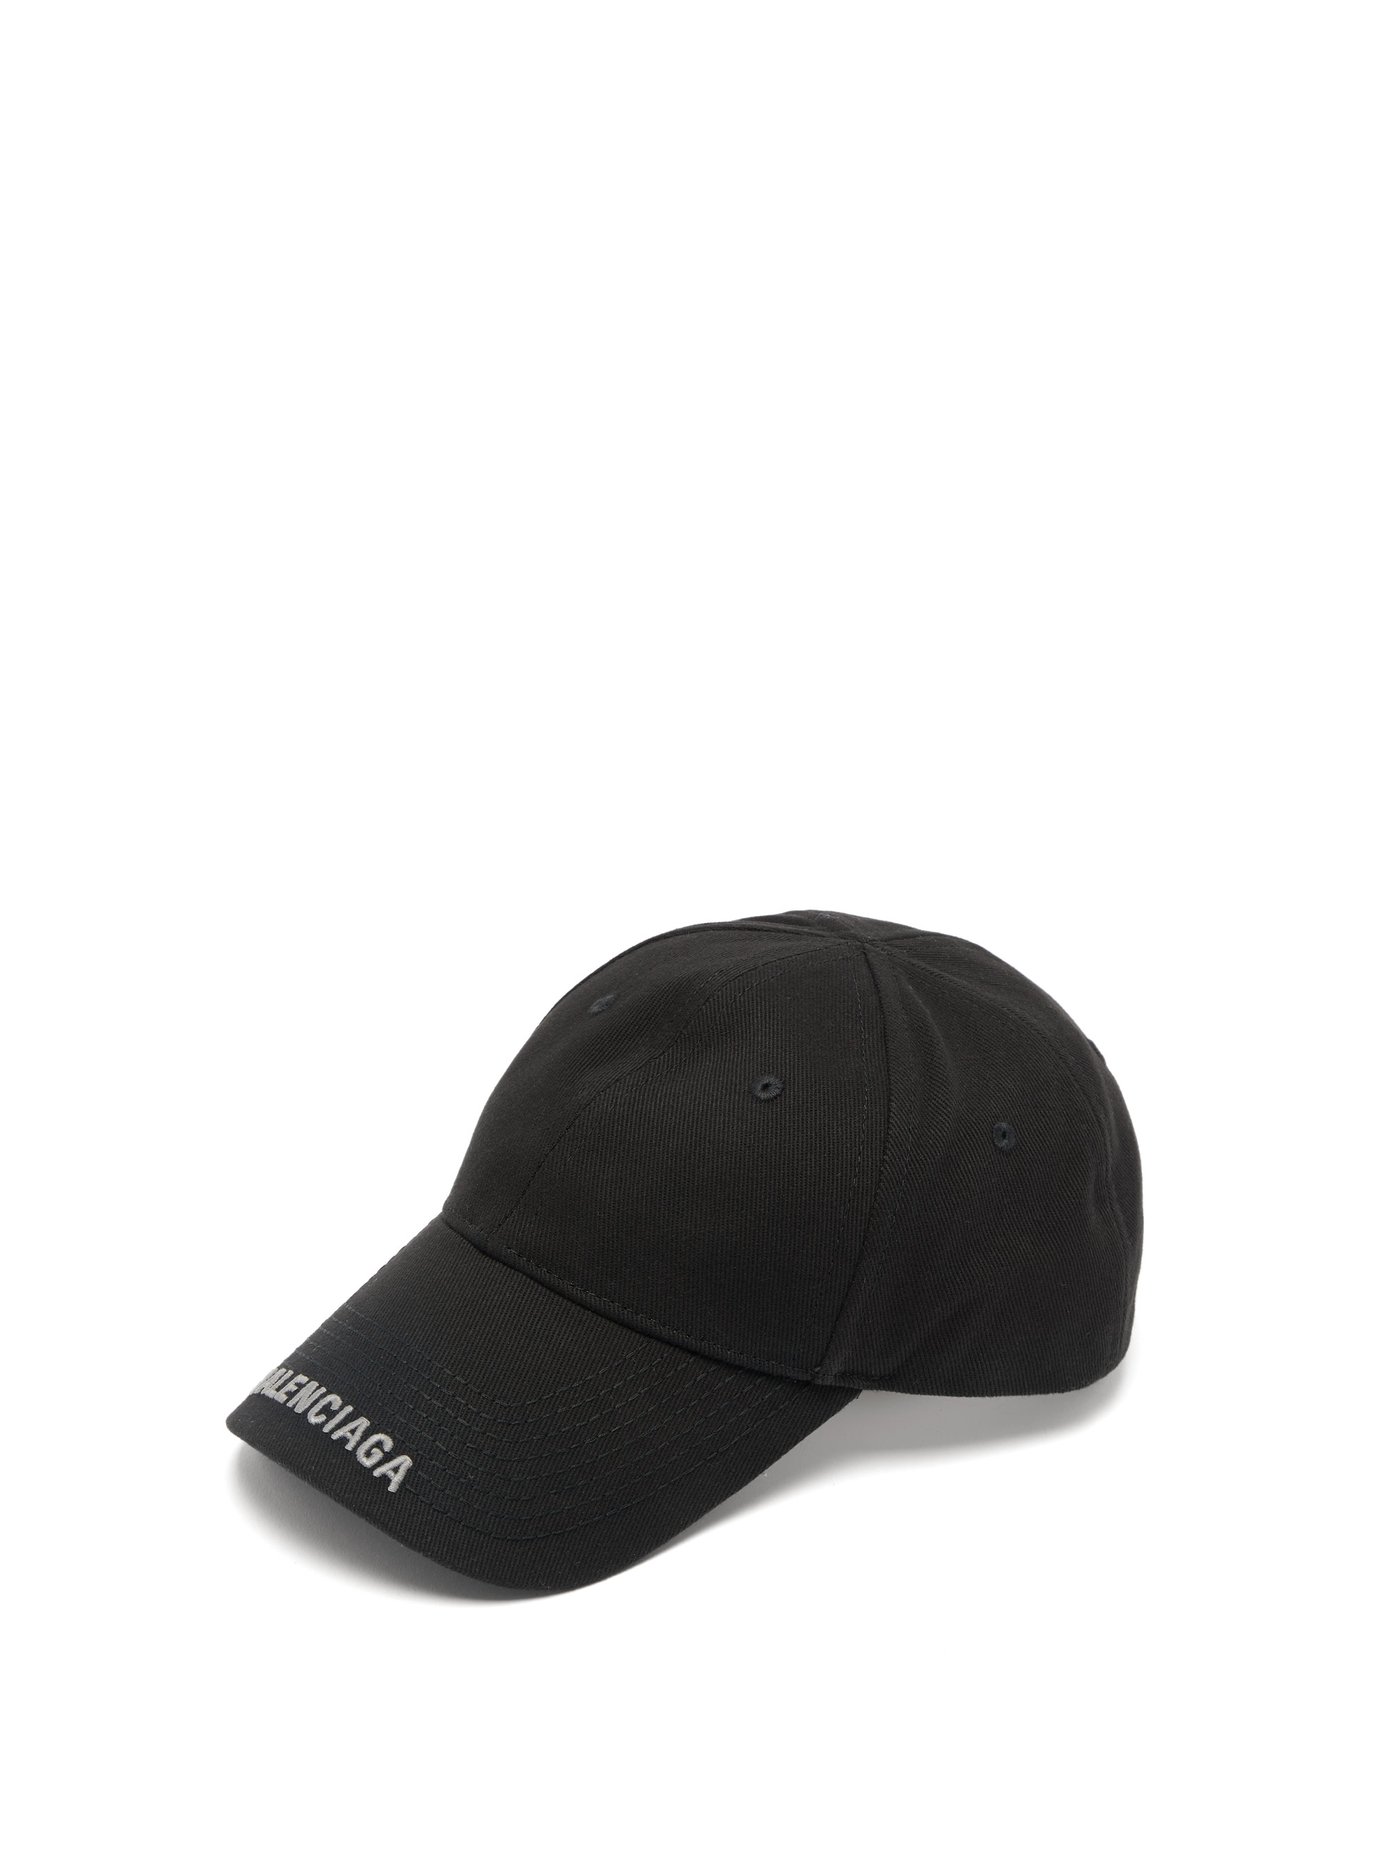 balenciaga fitted hat